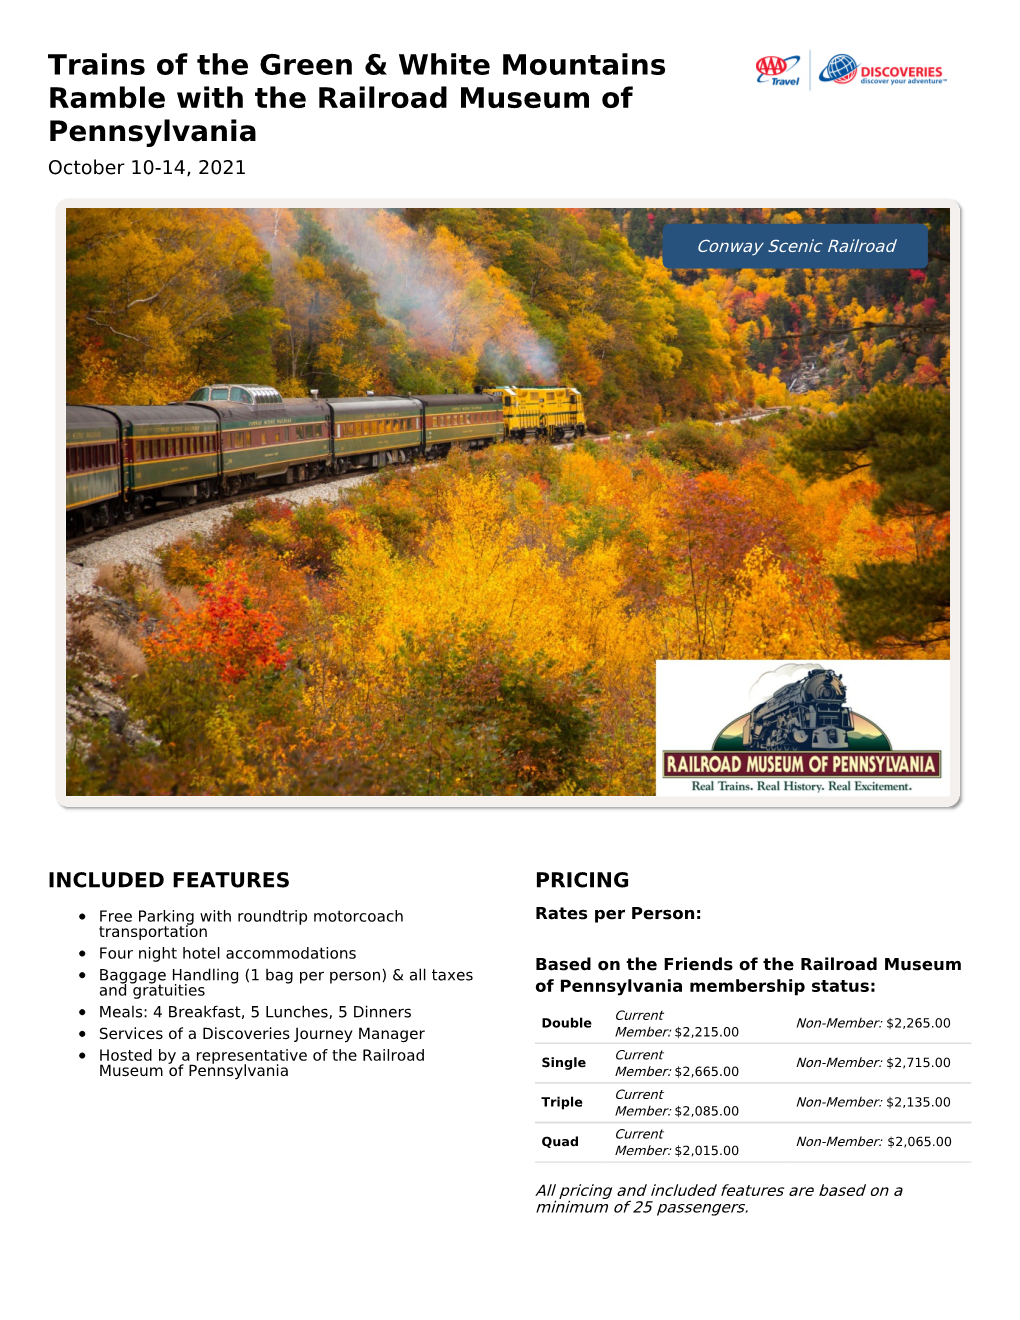 Trains of the Green & White Mountains Ramble with the Railroad Museum